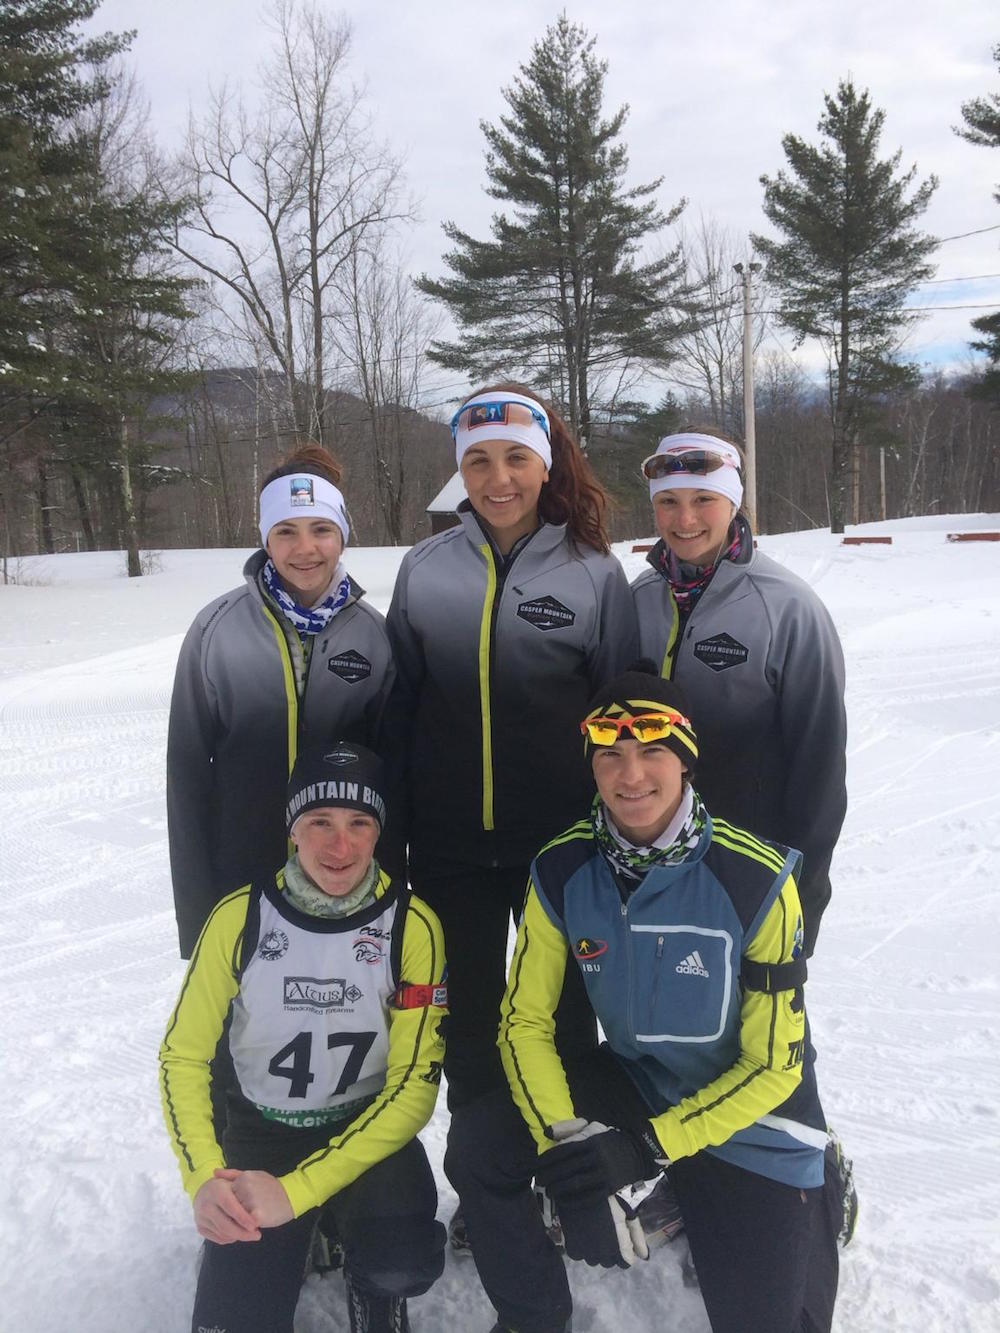  The Casper Mountain Biathlon Club team at 2014 U.S. biathlon nationals in Jericho, Vt. (from left to right, back to front): Madison Tinker, Rylie Garner, Katherine Gruner,  and Christian Bjorklund and Jake Pearson. (Photo: CMBC)